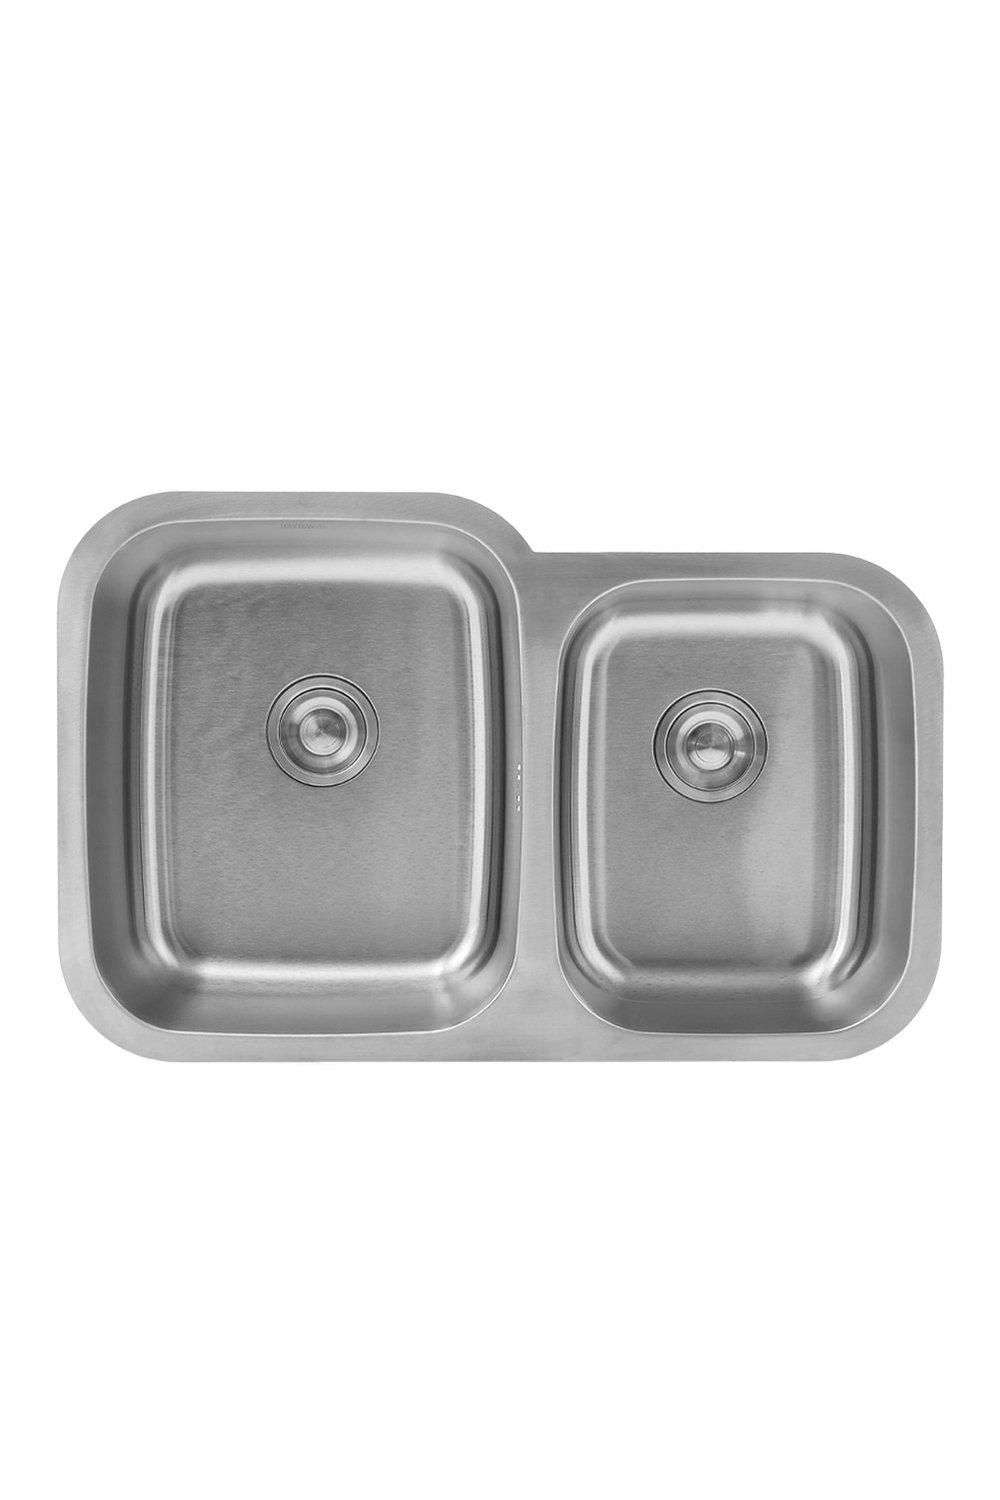 Built-In Stainless Steel Double Kitchen Sink